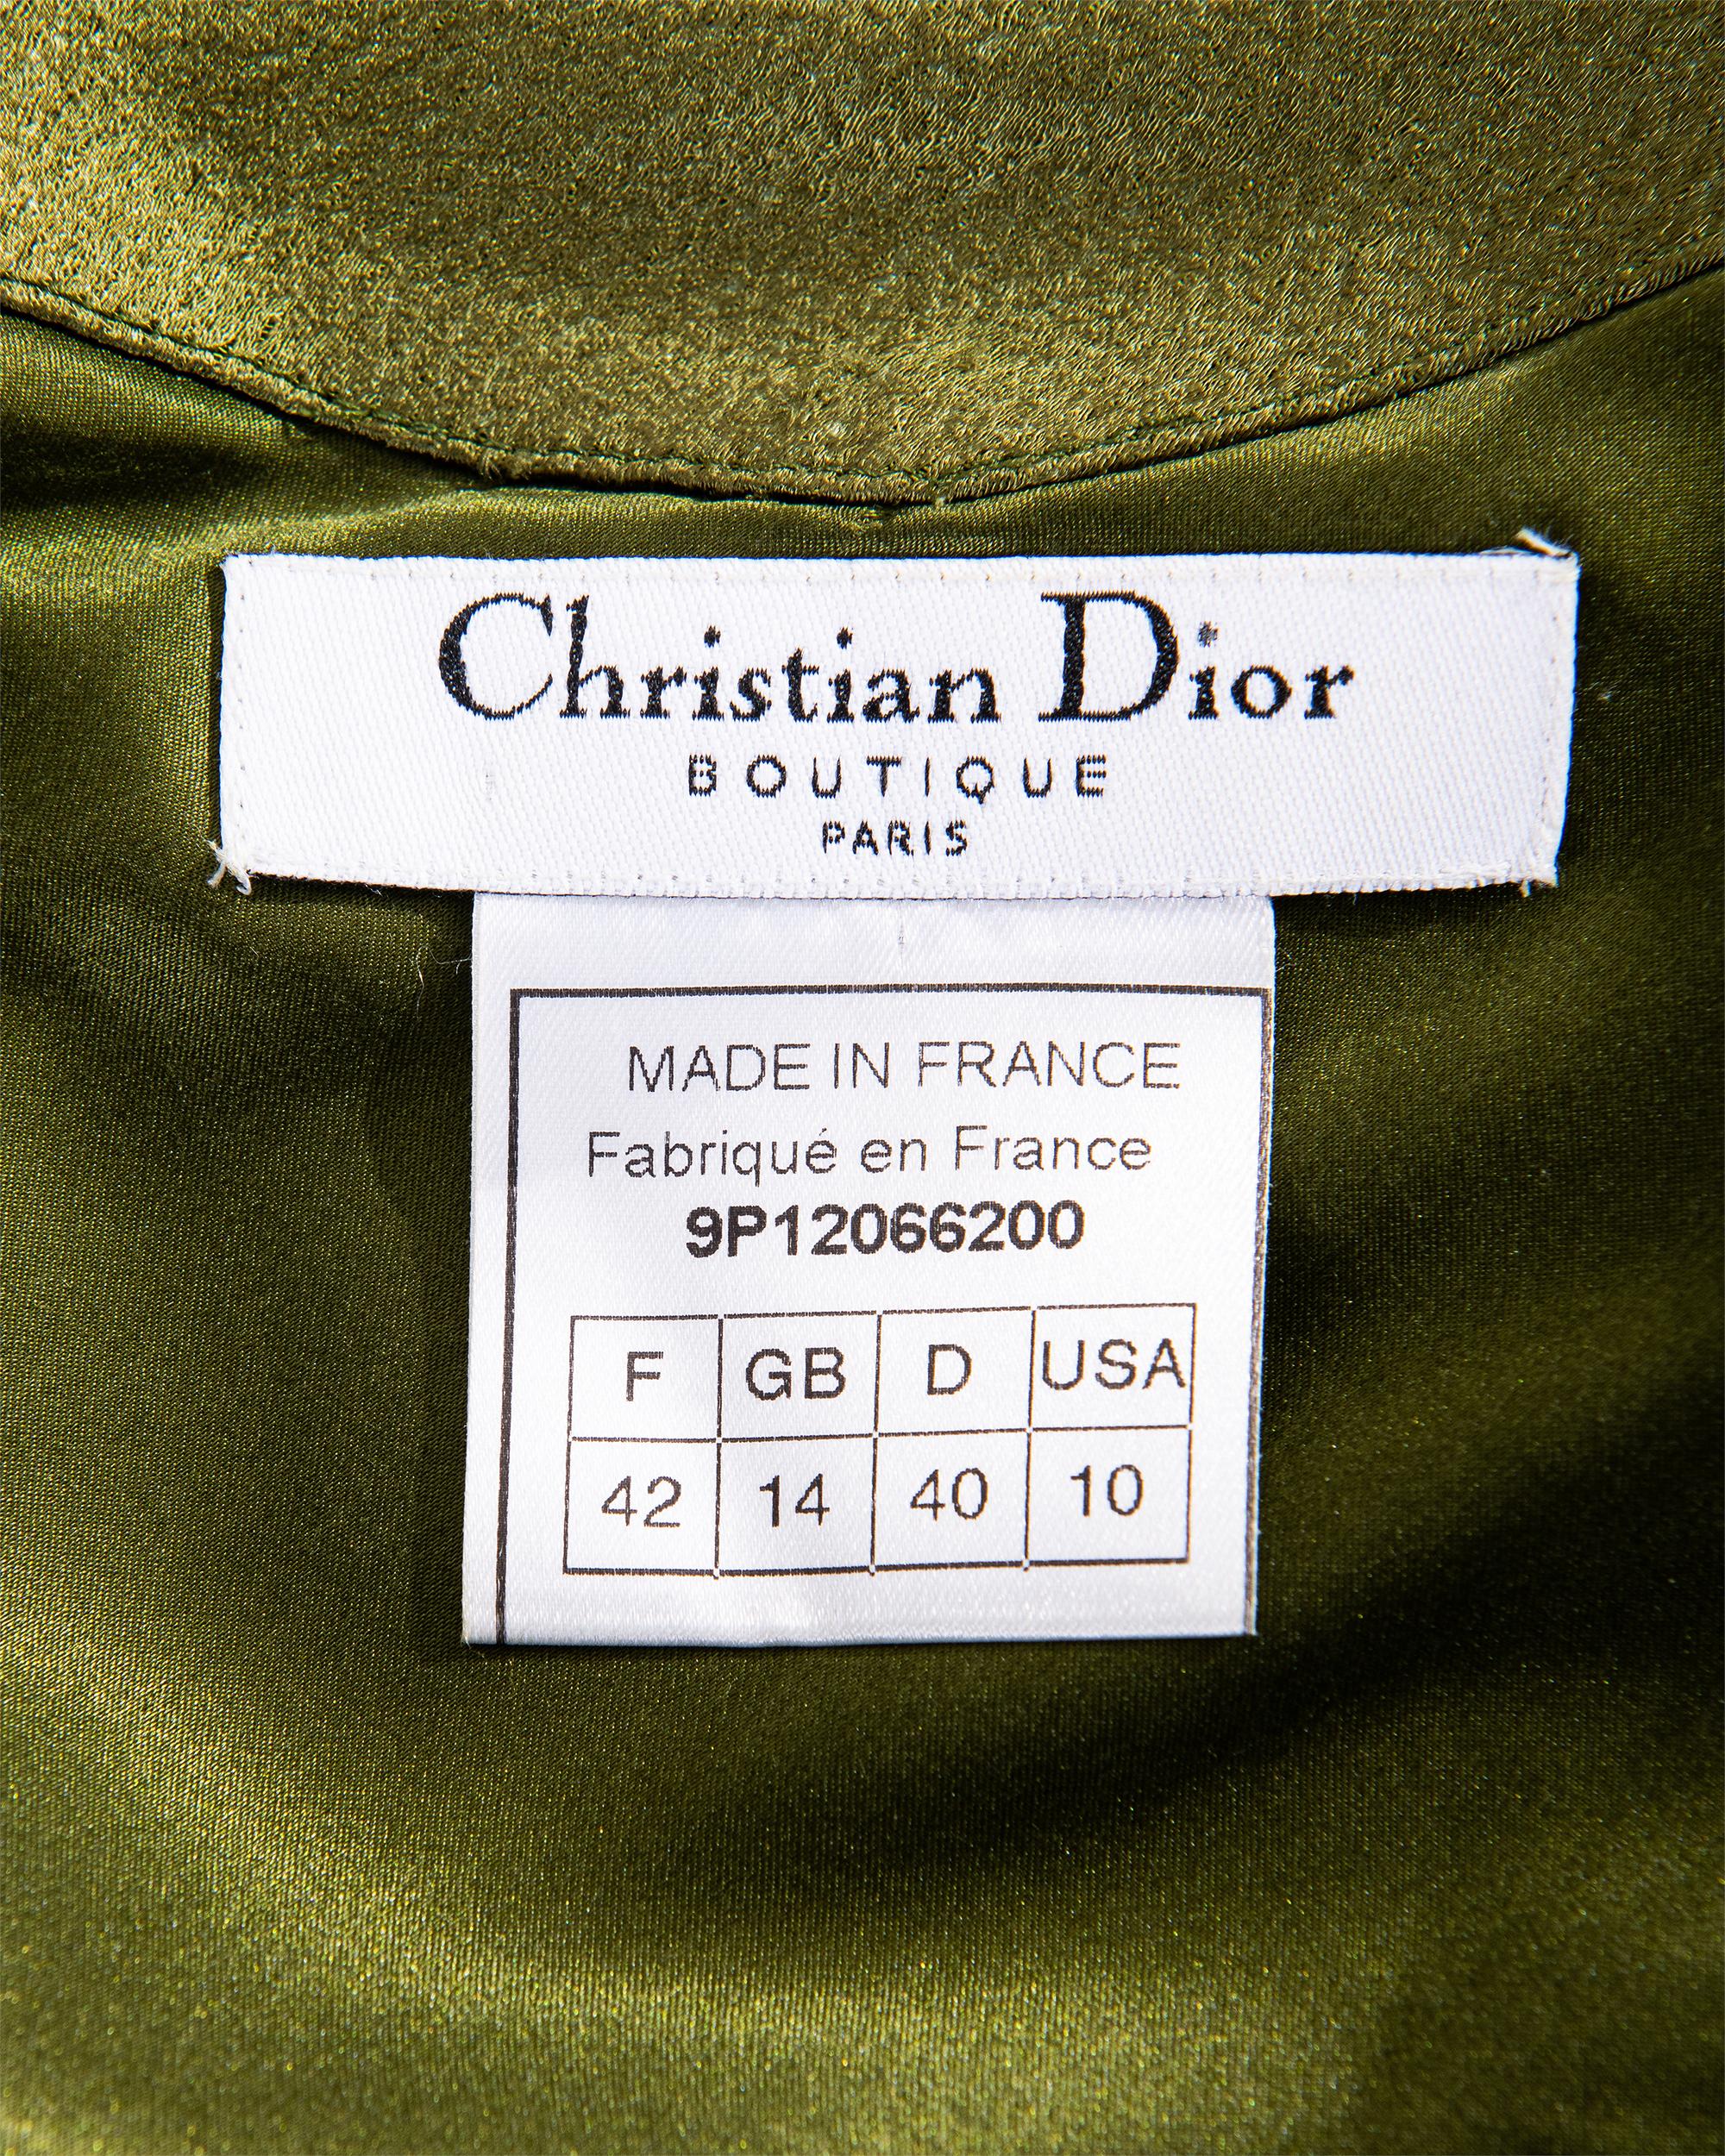 S/S 1999 Christian Dior by John Galliano Olive Green Bias Cut Slip Gown 7